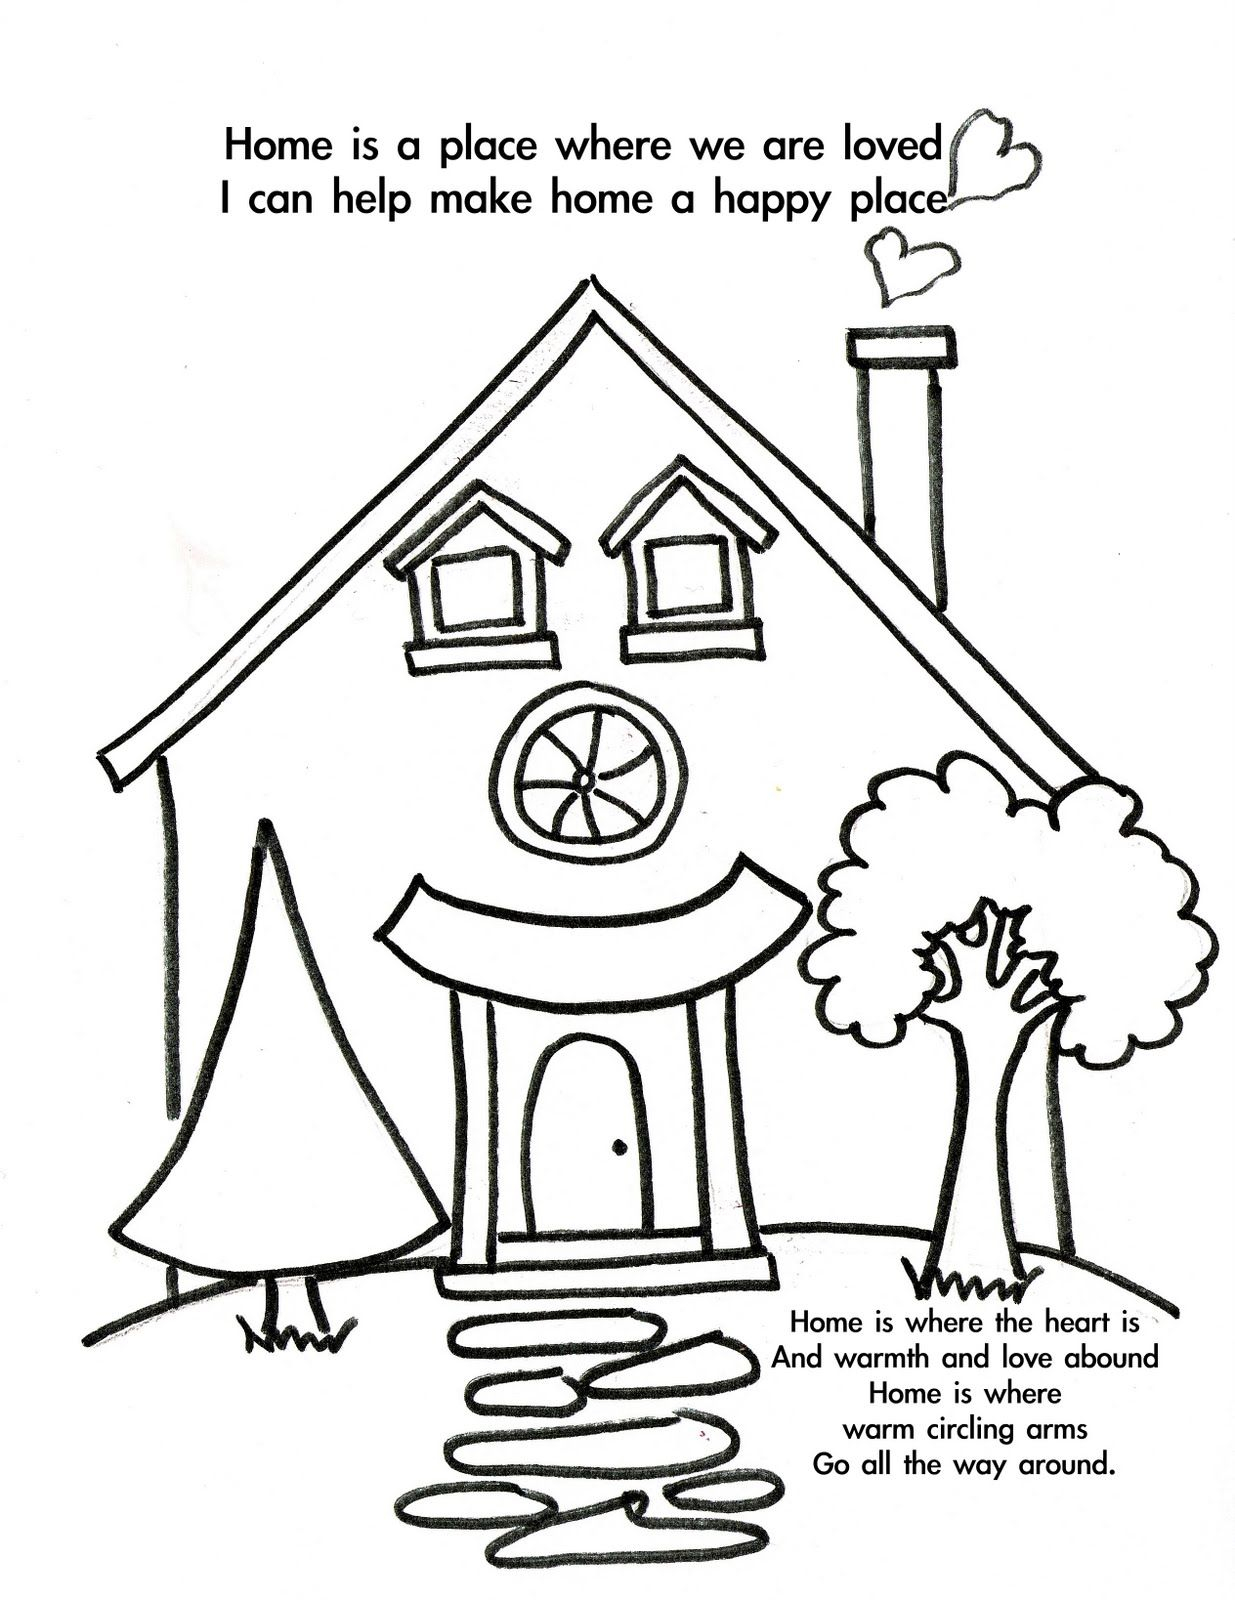 Welcome Coloring Pages Welcome Home Coloring Page Coloring Pages For Kids And For Adults